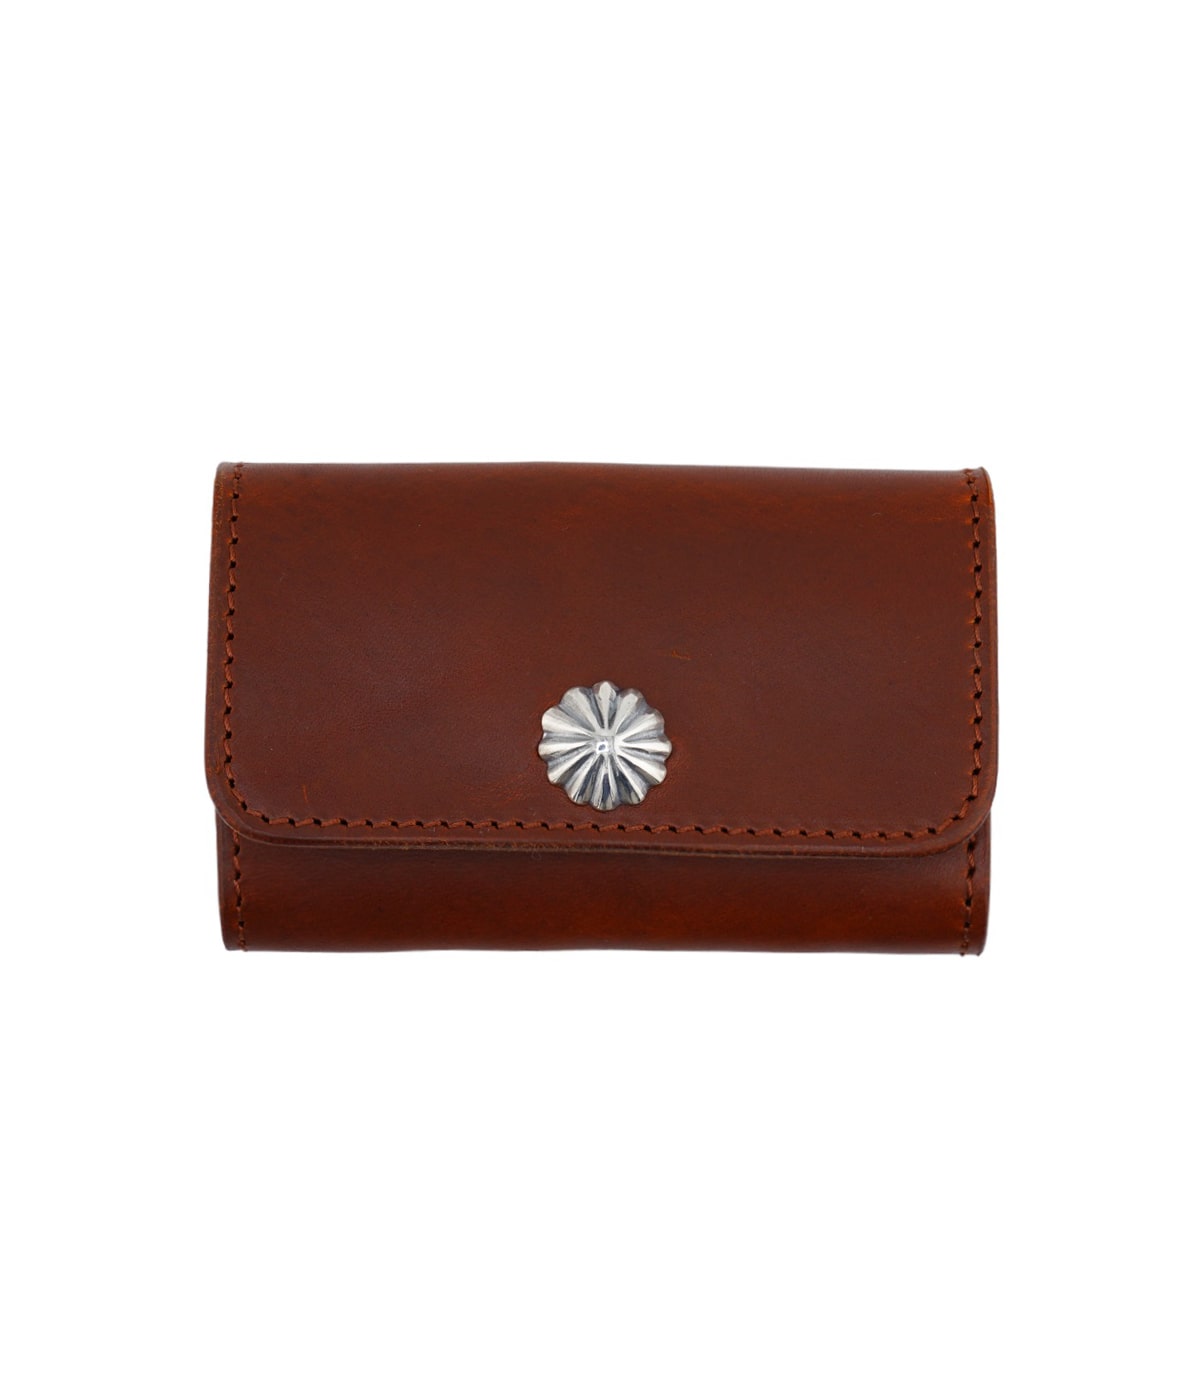 CLASSIC CARD CASE No.1 -SHELL-